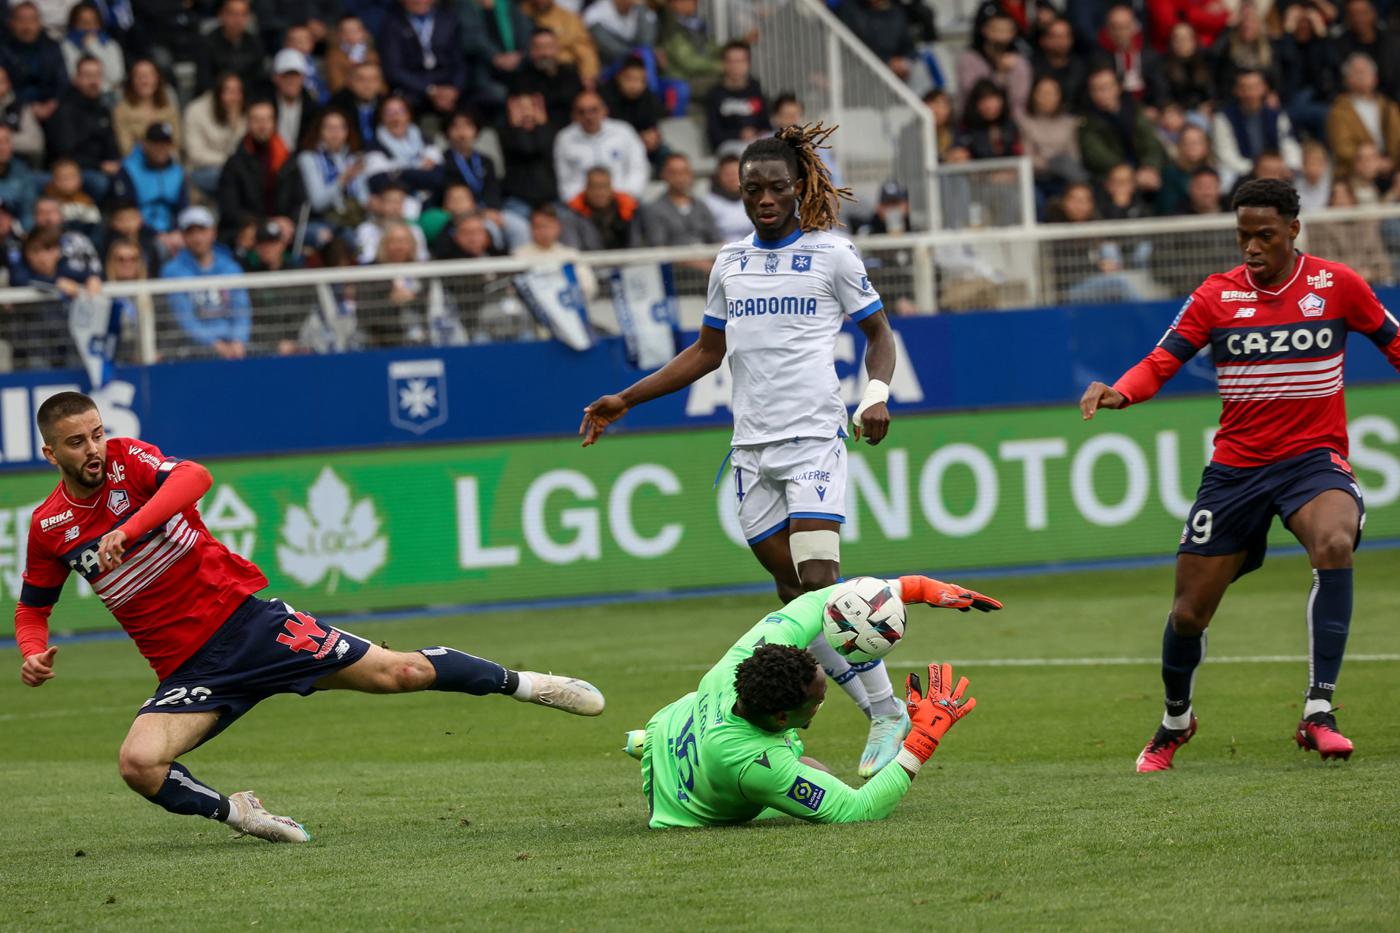 Auxerre - Lille - 1:1. French Championship, round of 32. Match review, statistics.